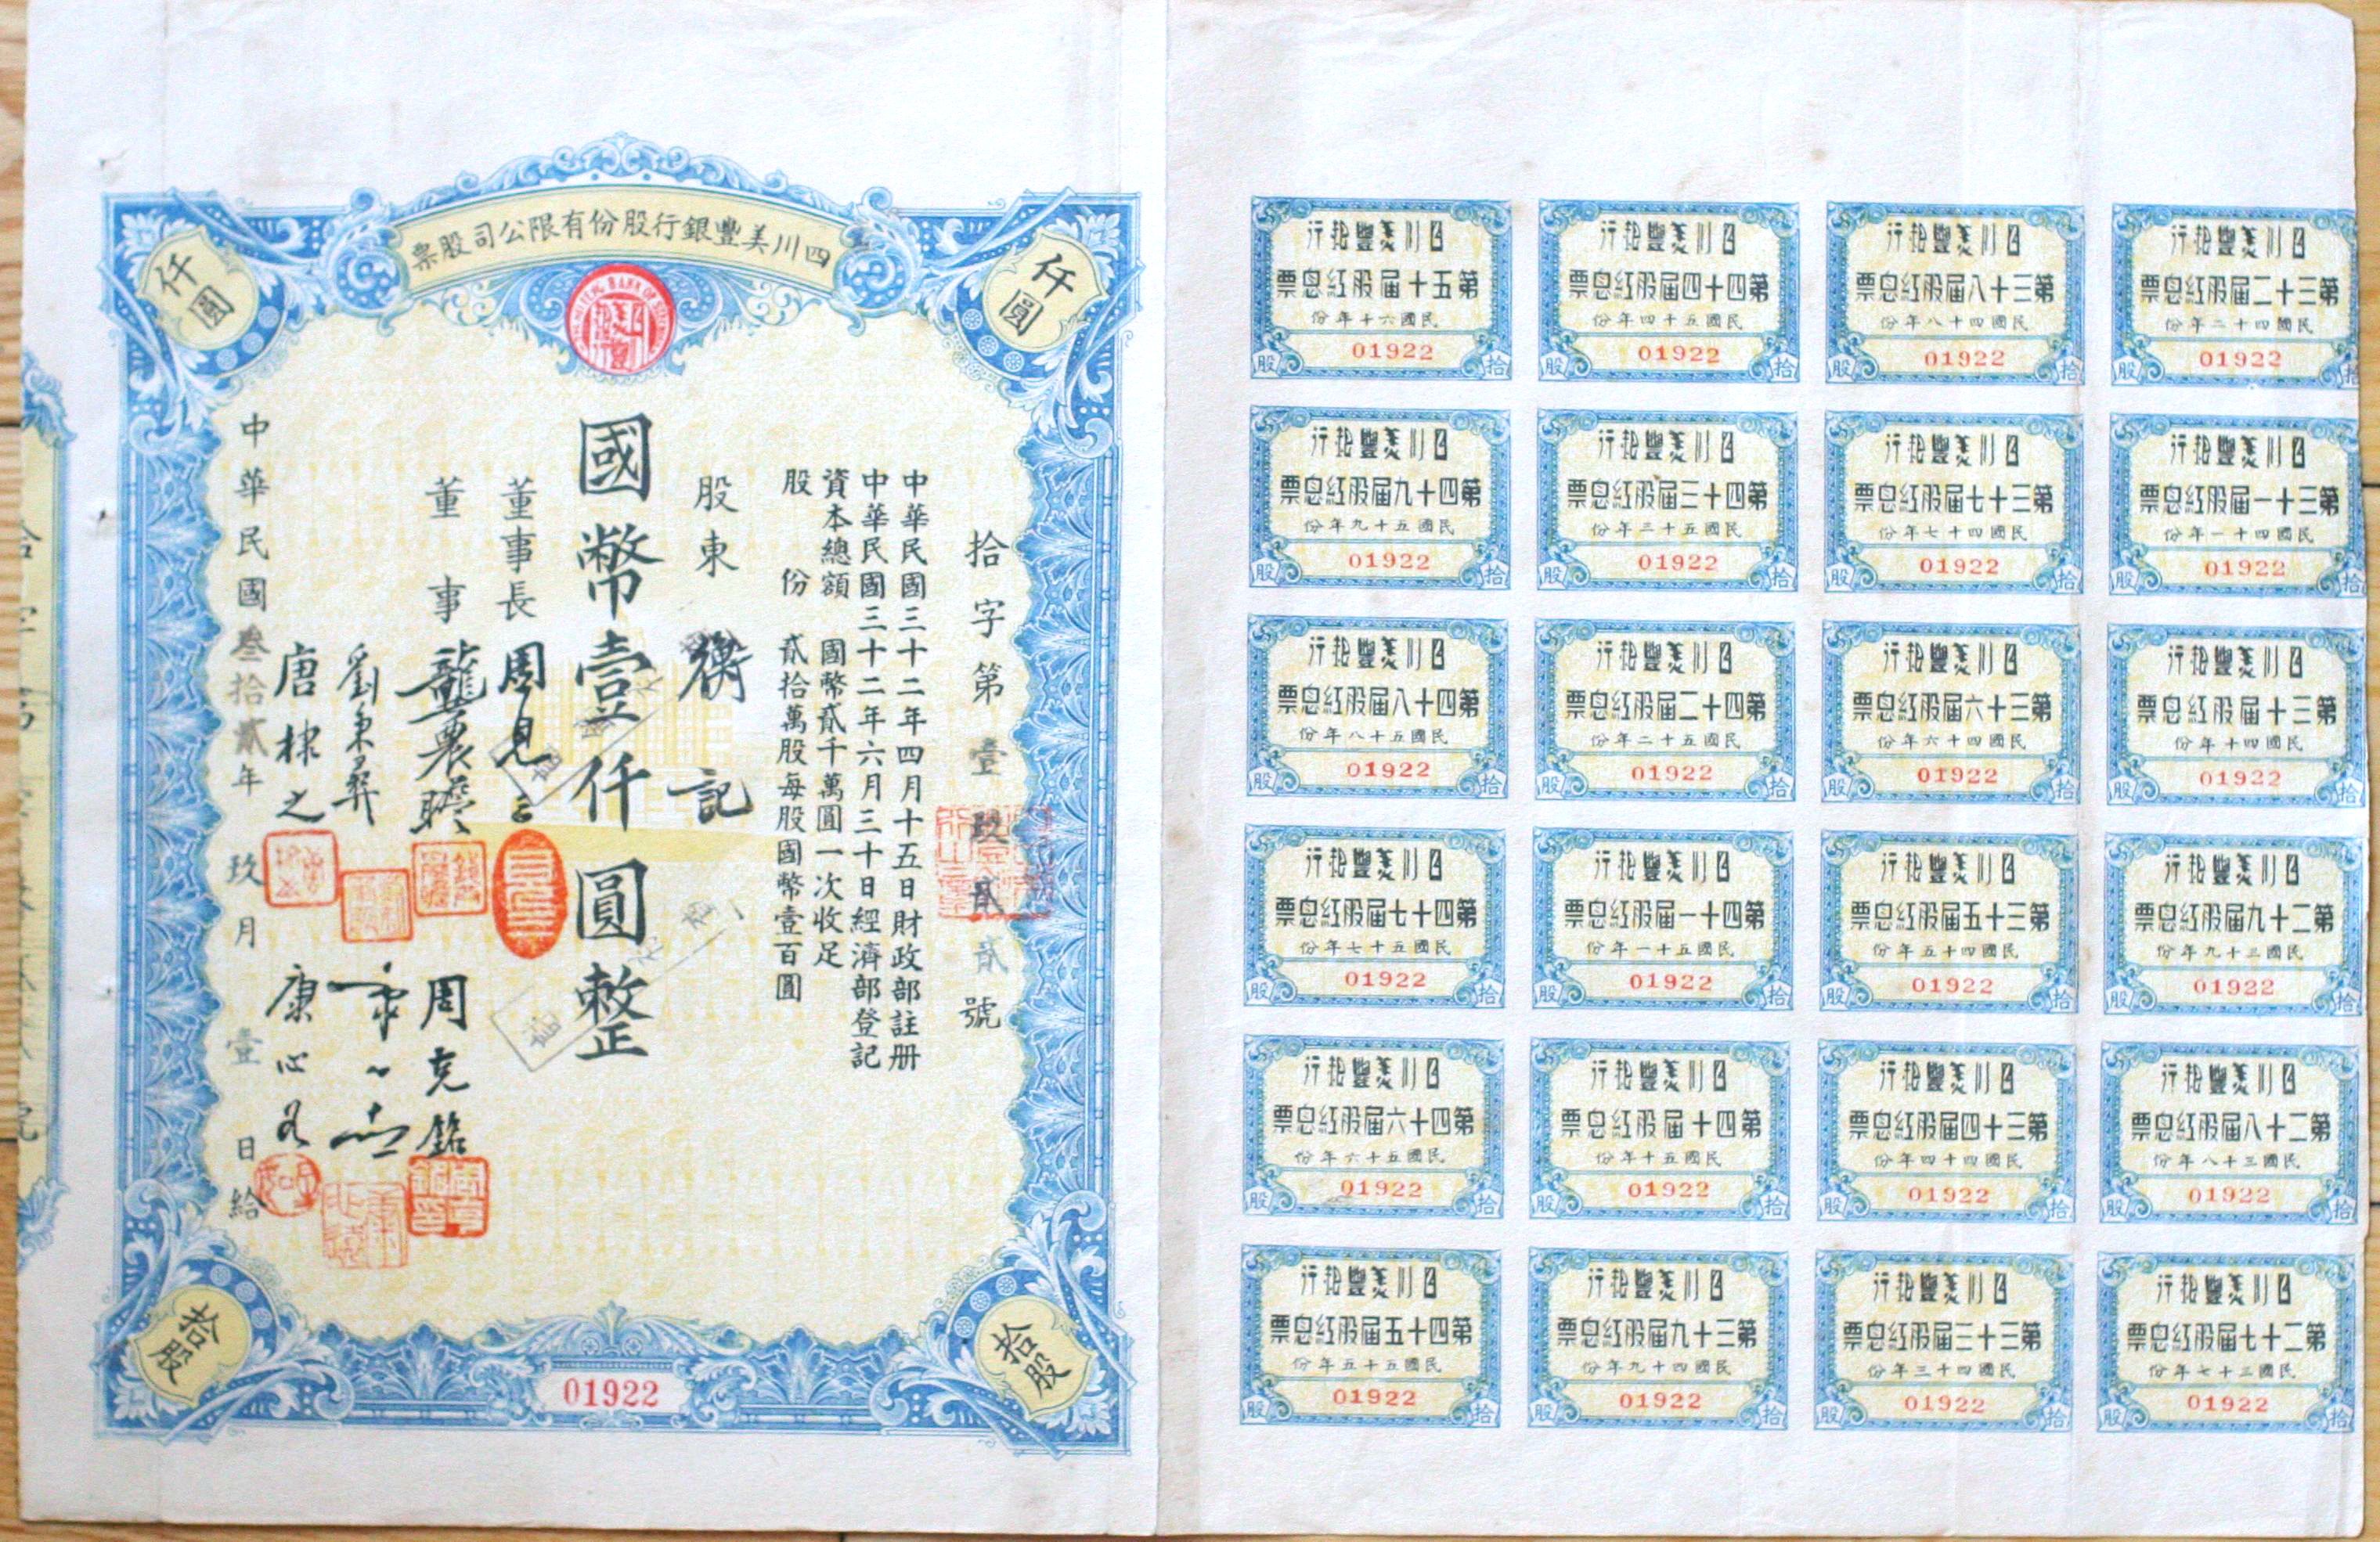 S0118, Sichuan Mei-Feng Bank Co., Stock Certificate of 10 Shares, China 1937